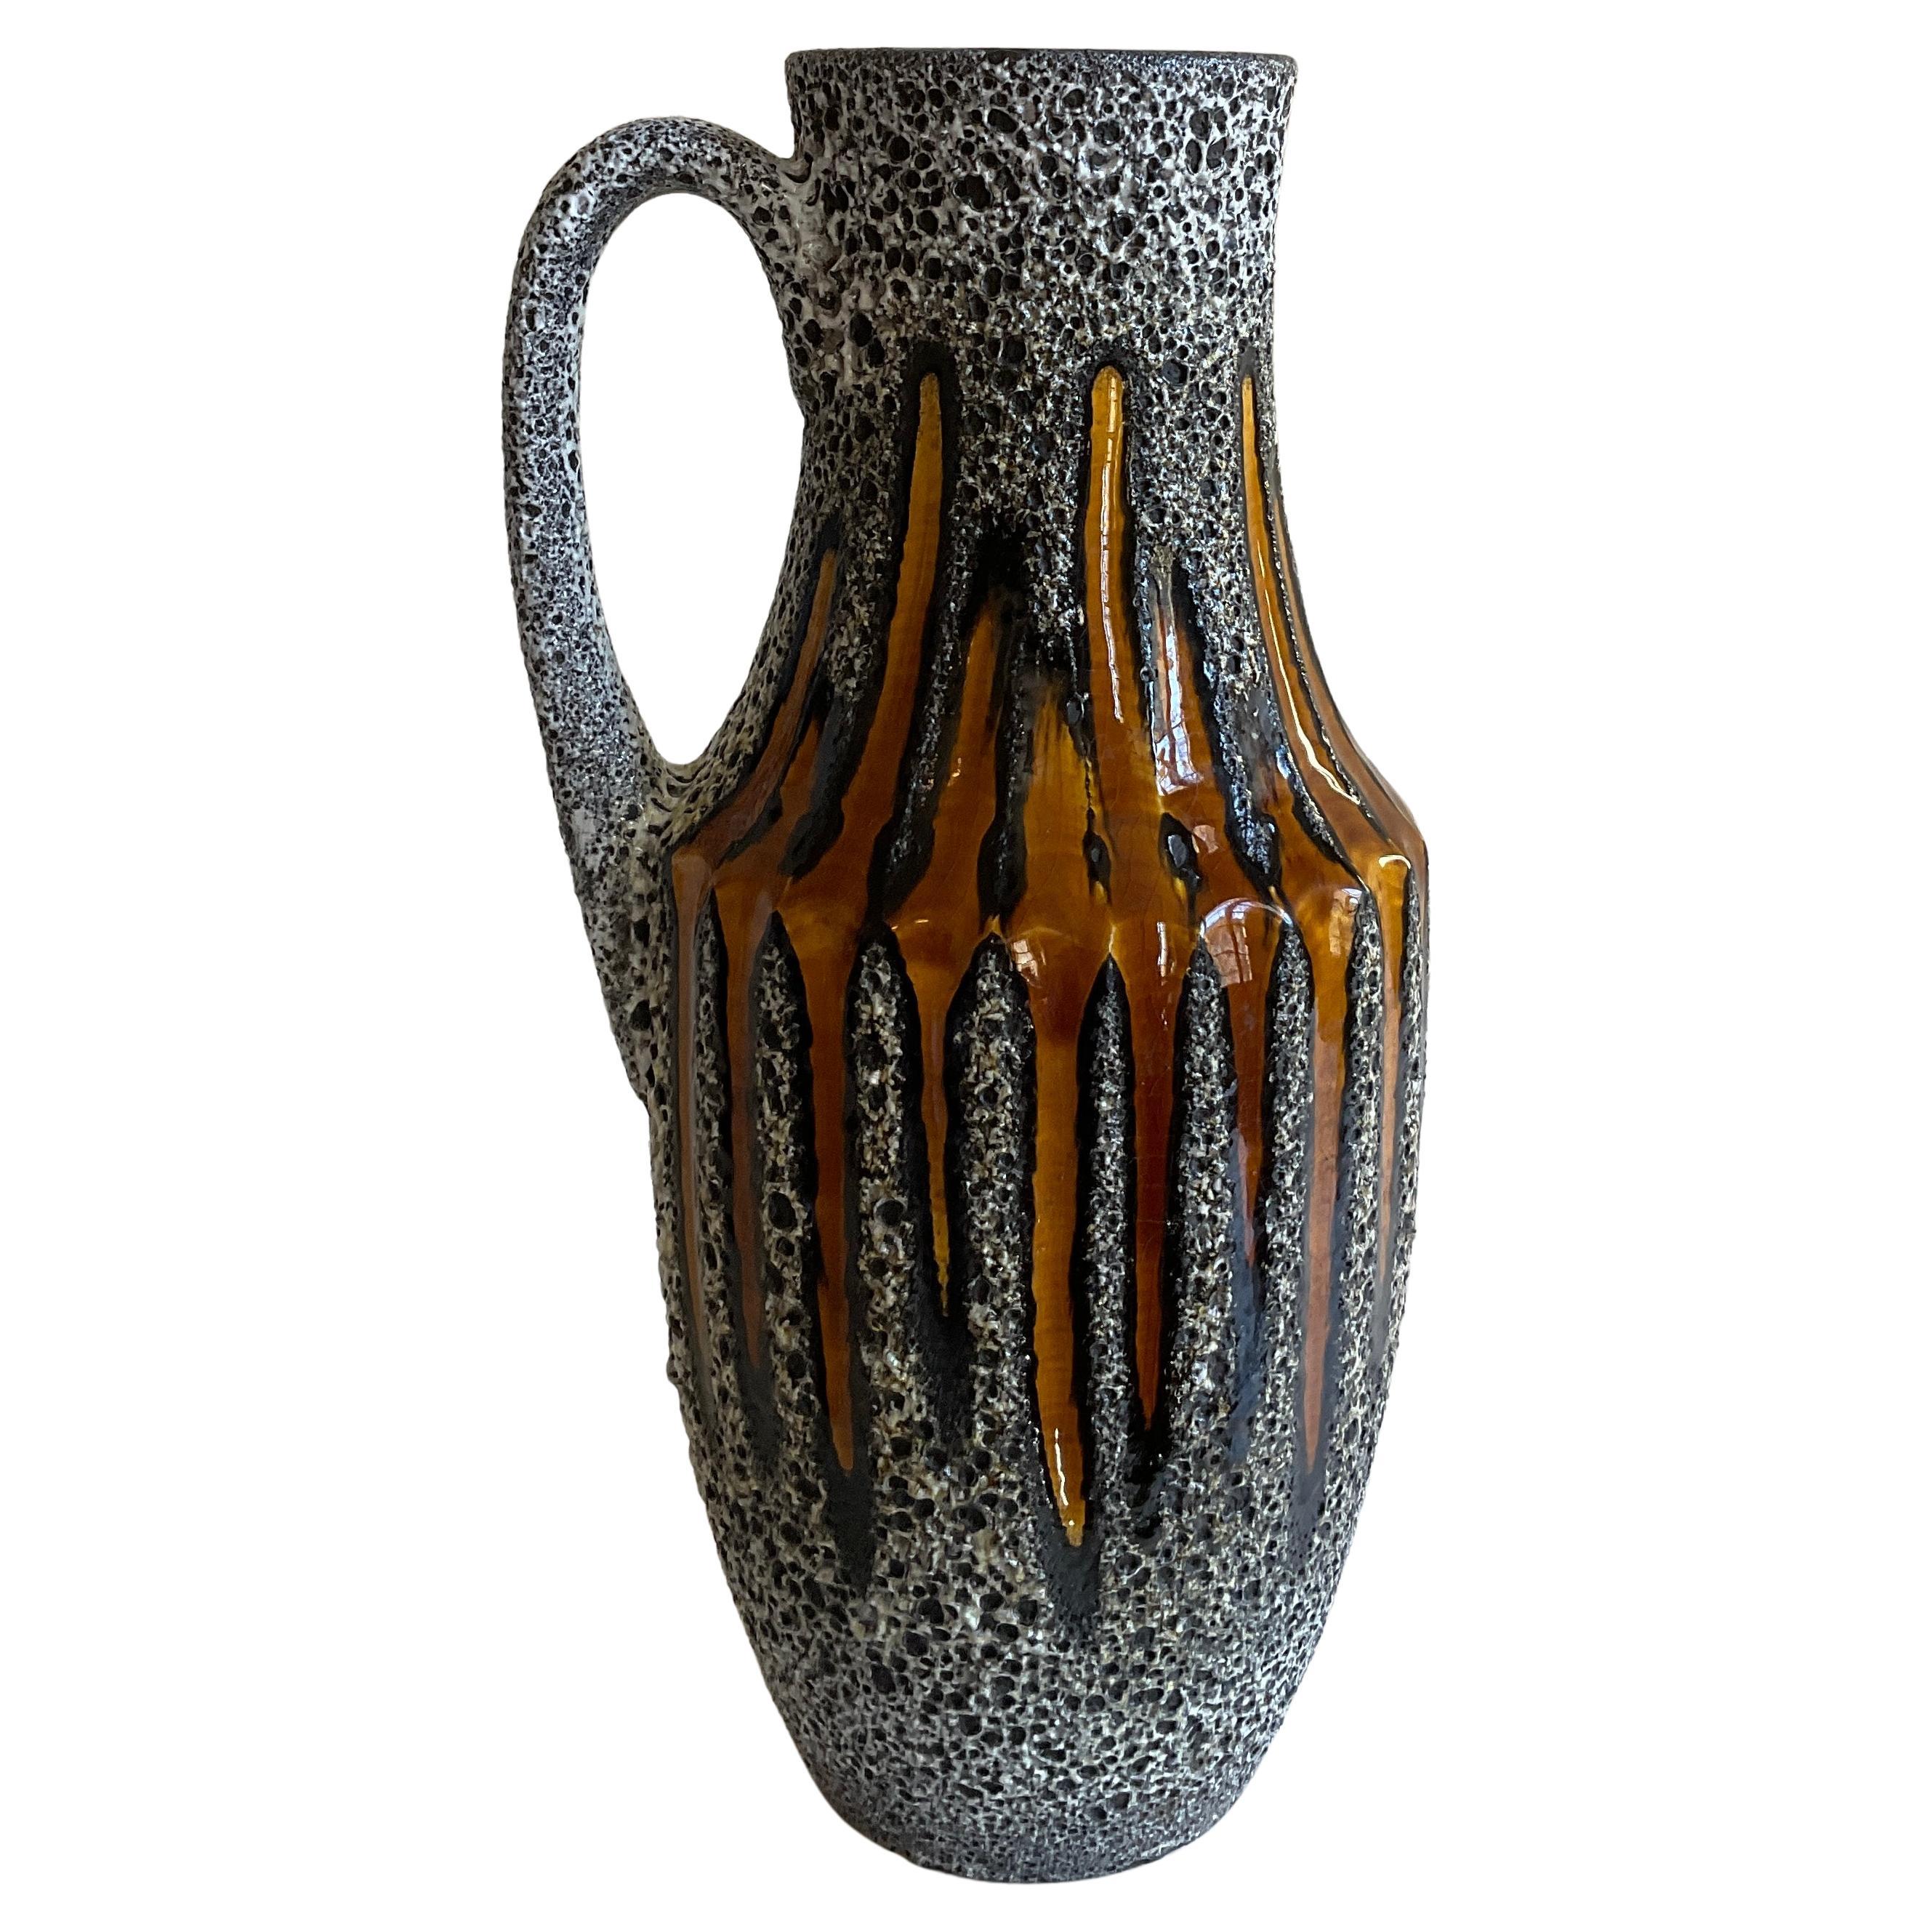 Mid-20th Century West Germany Studio Pottery Pitcher Vase For Sale